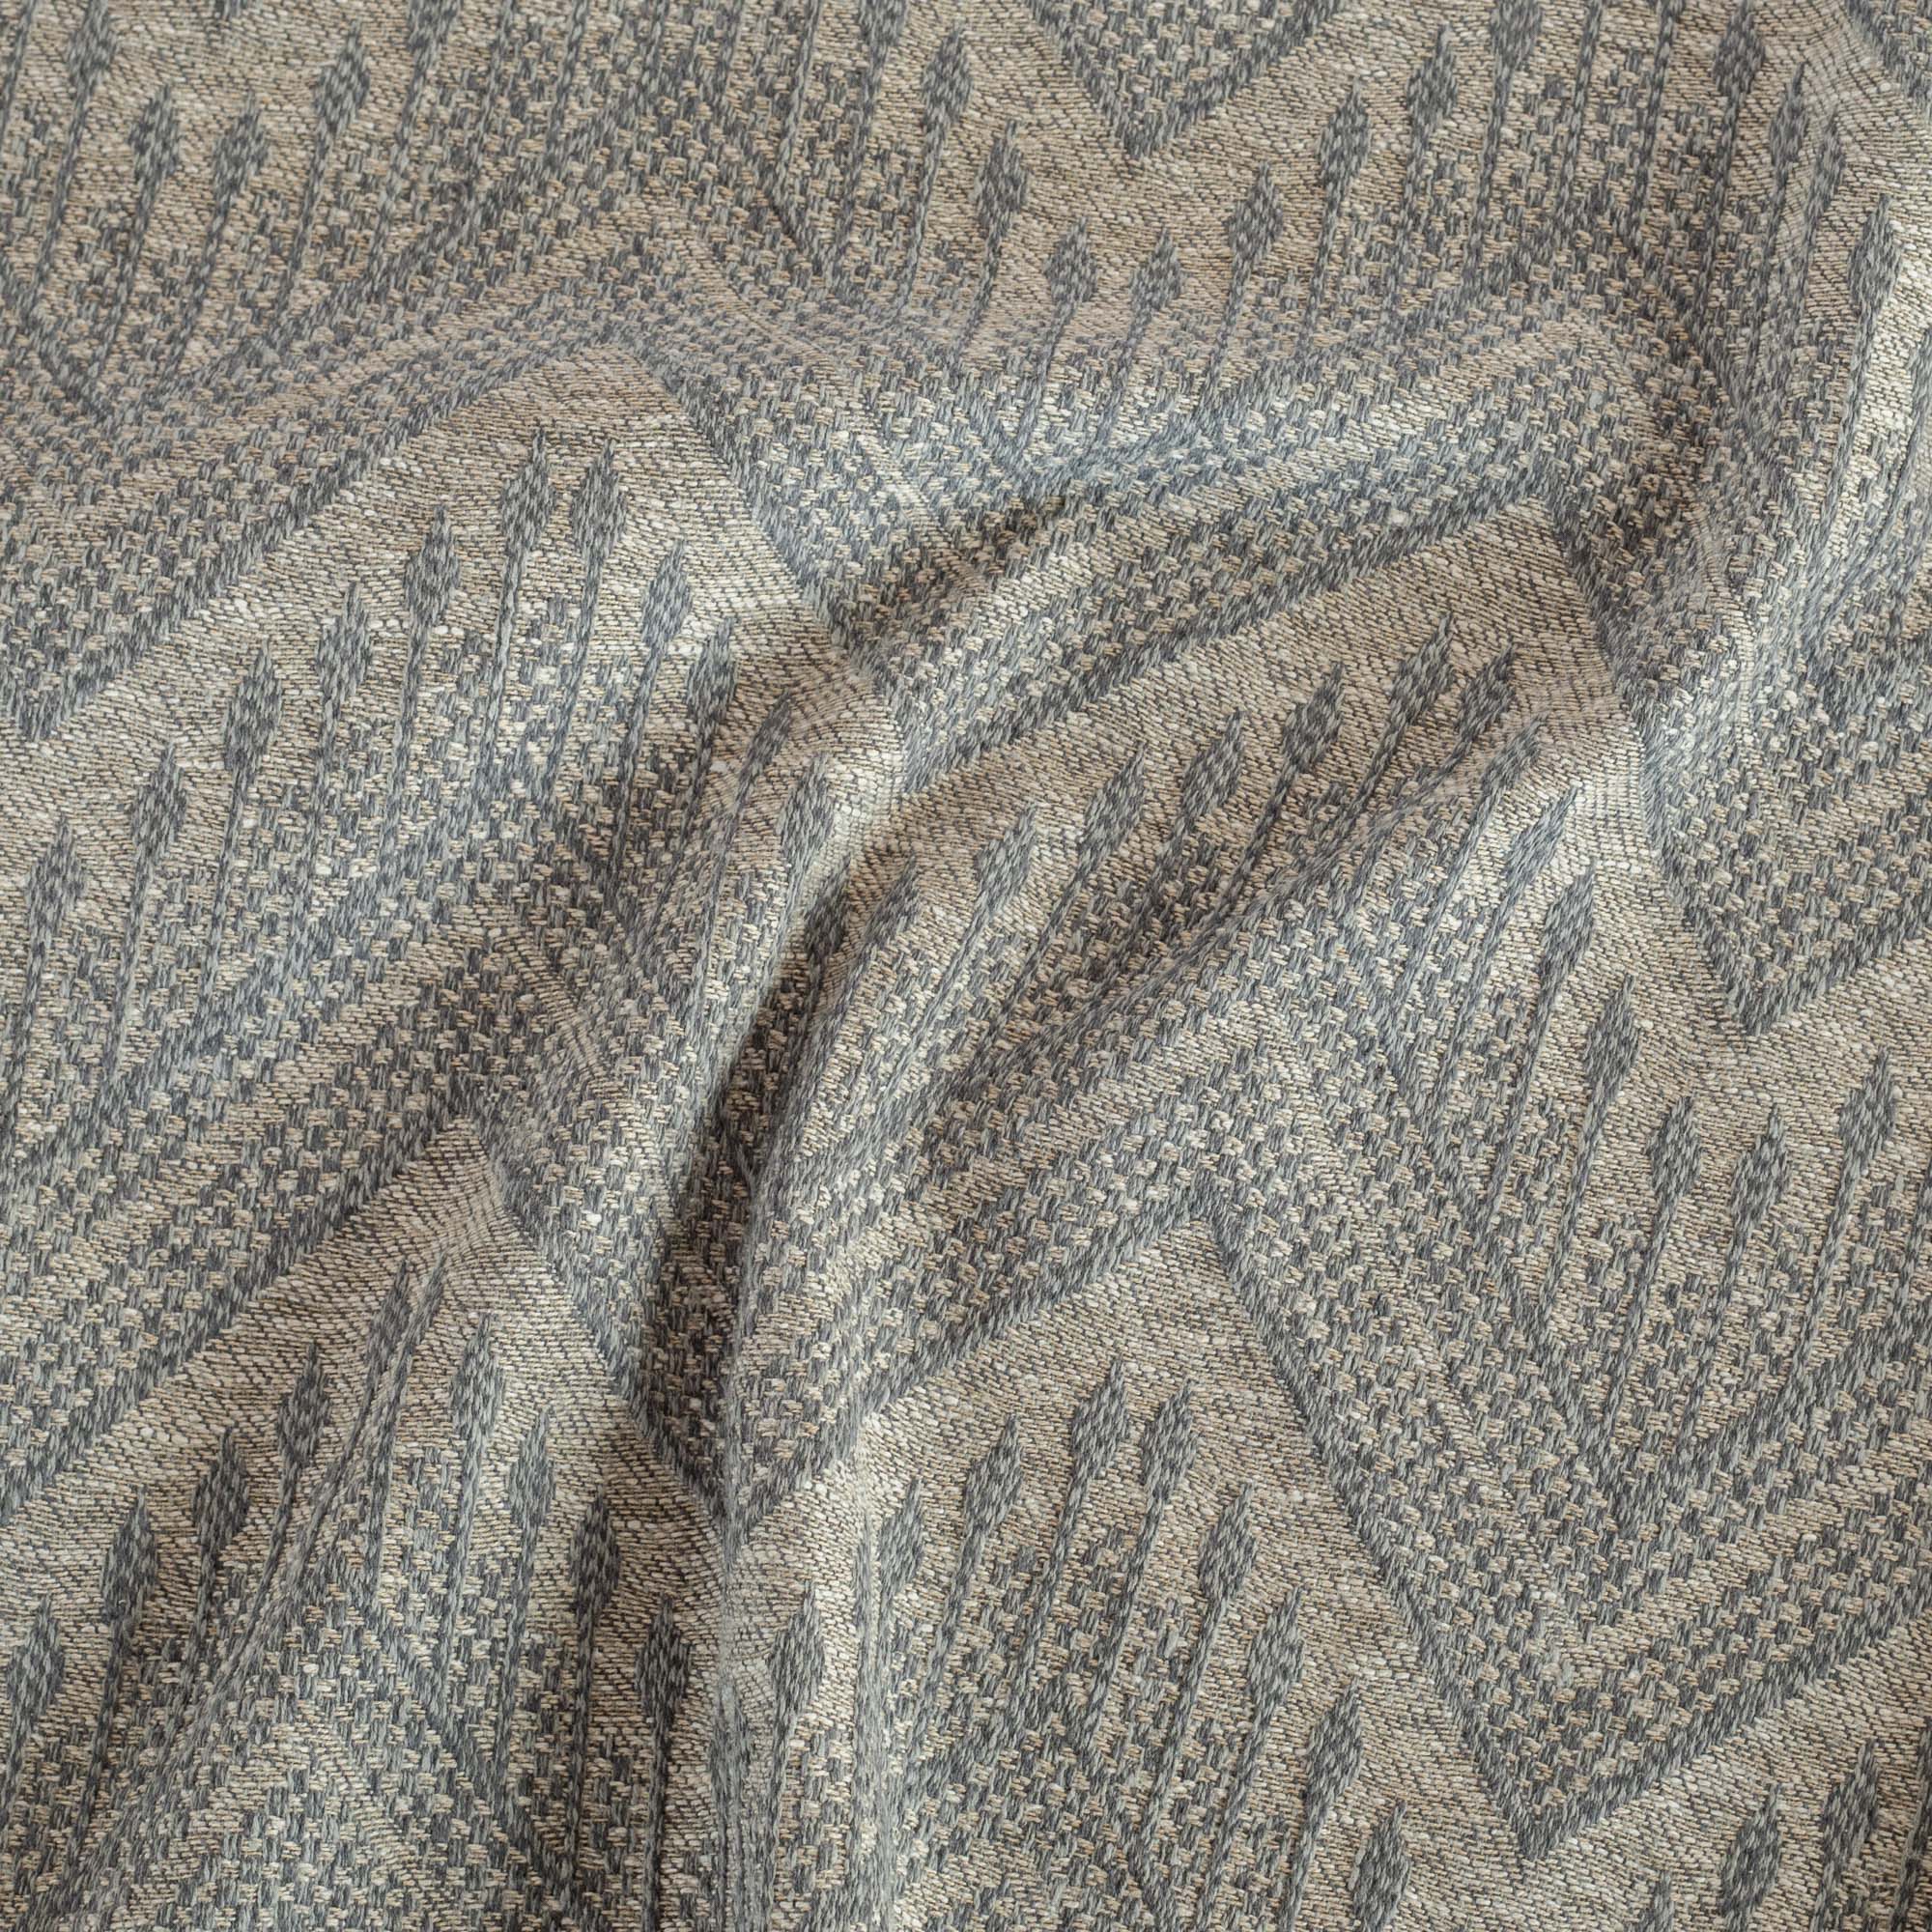 a warm grey and stone blue tapestry woven upholstery fabric : close up view 3